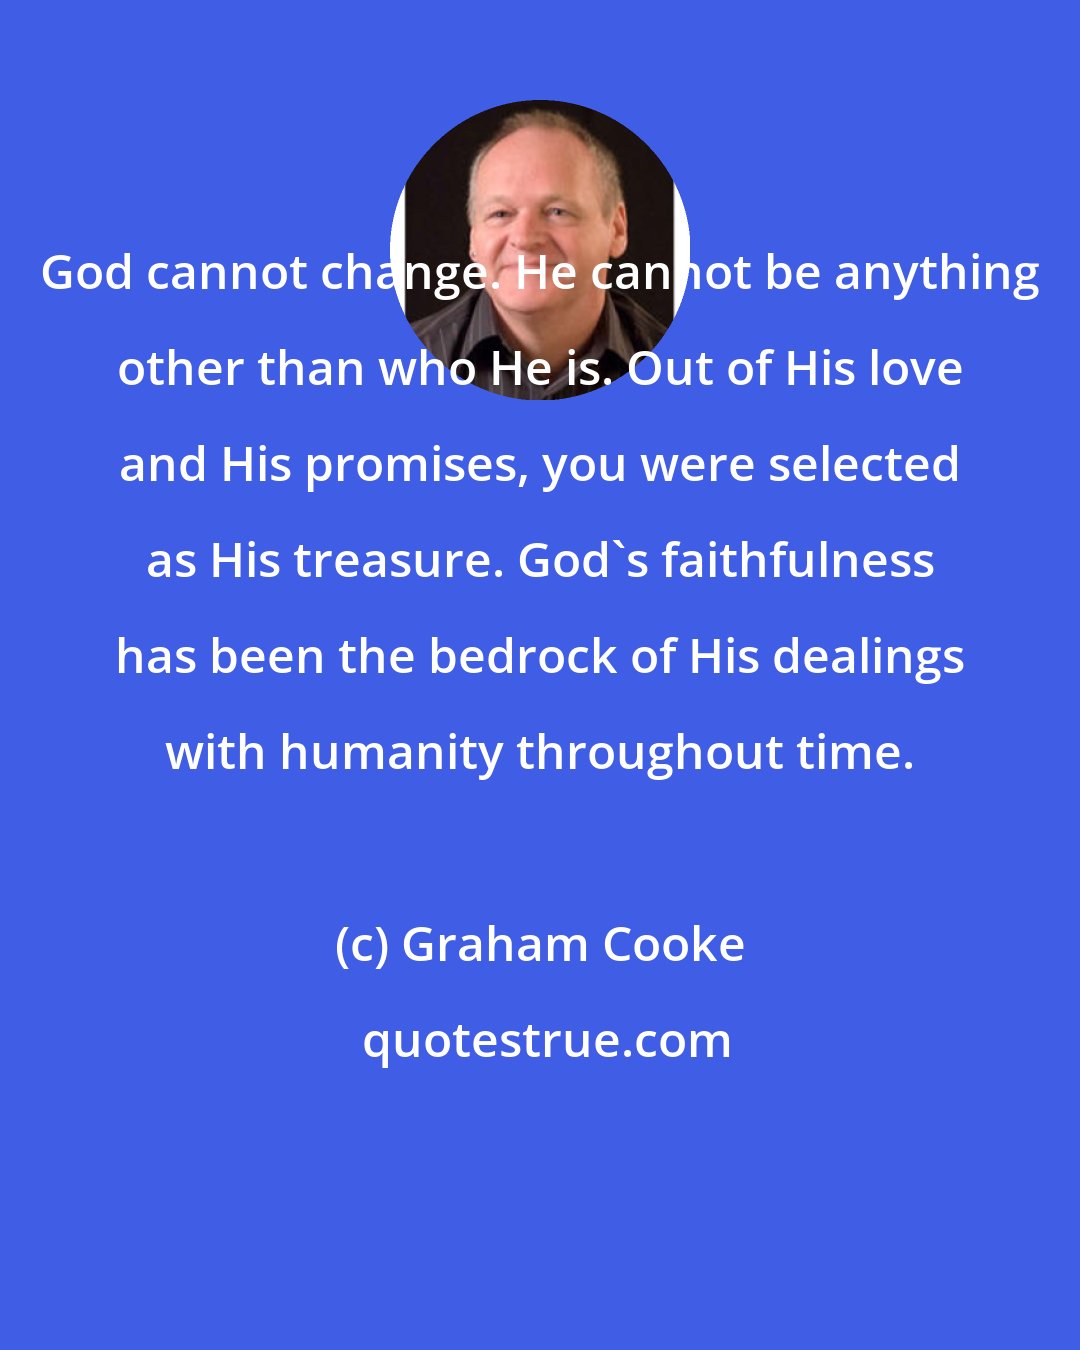 Graham Cooke: God cannot change. He cannot be anything other than who He is. Out of His love and His promises, you were selected as His treasure. God's faithfulness has been the bedrock of His dealings with humanity throughout time.